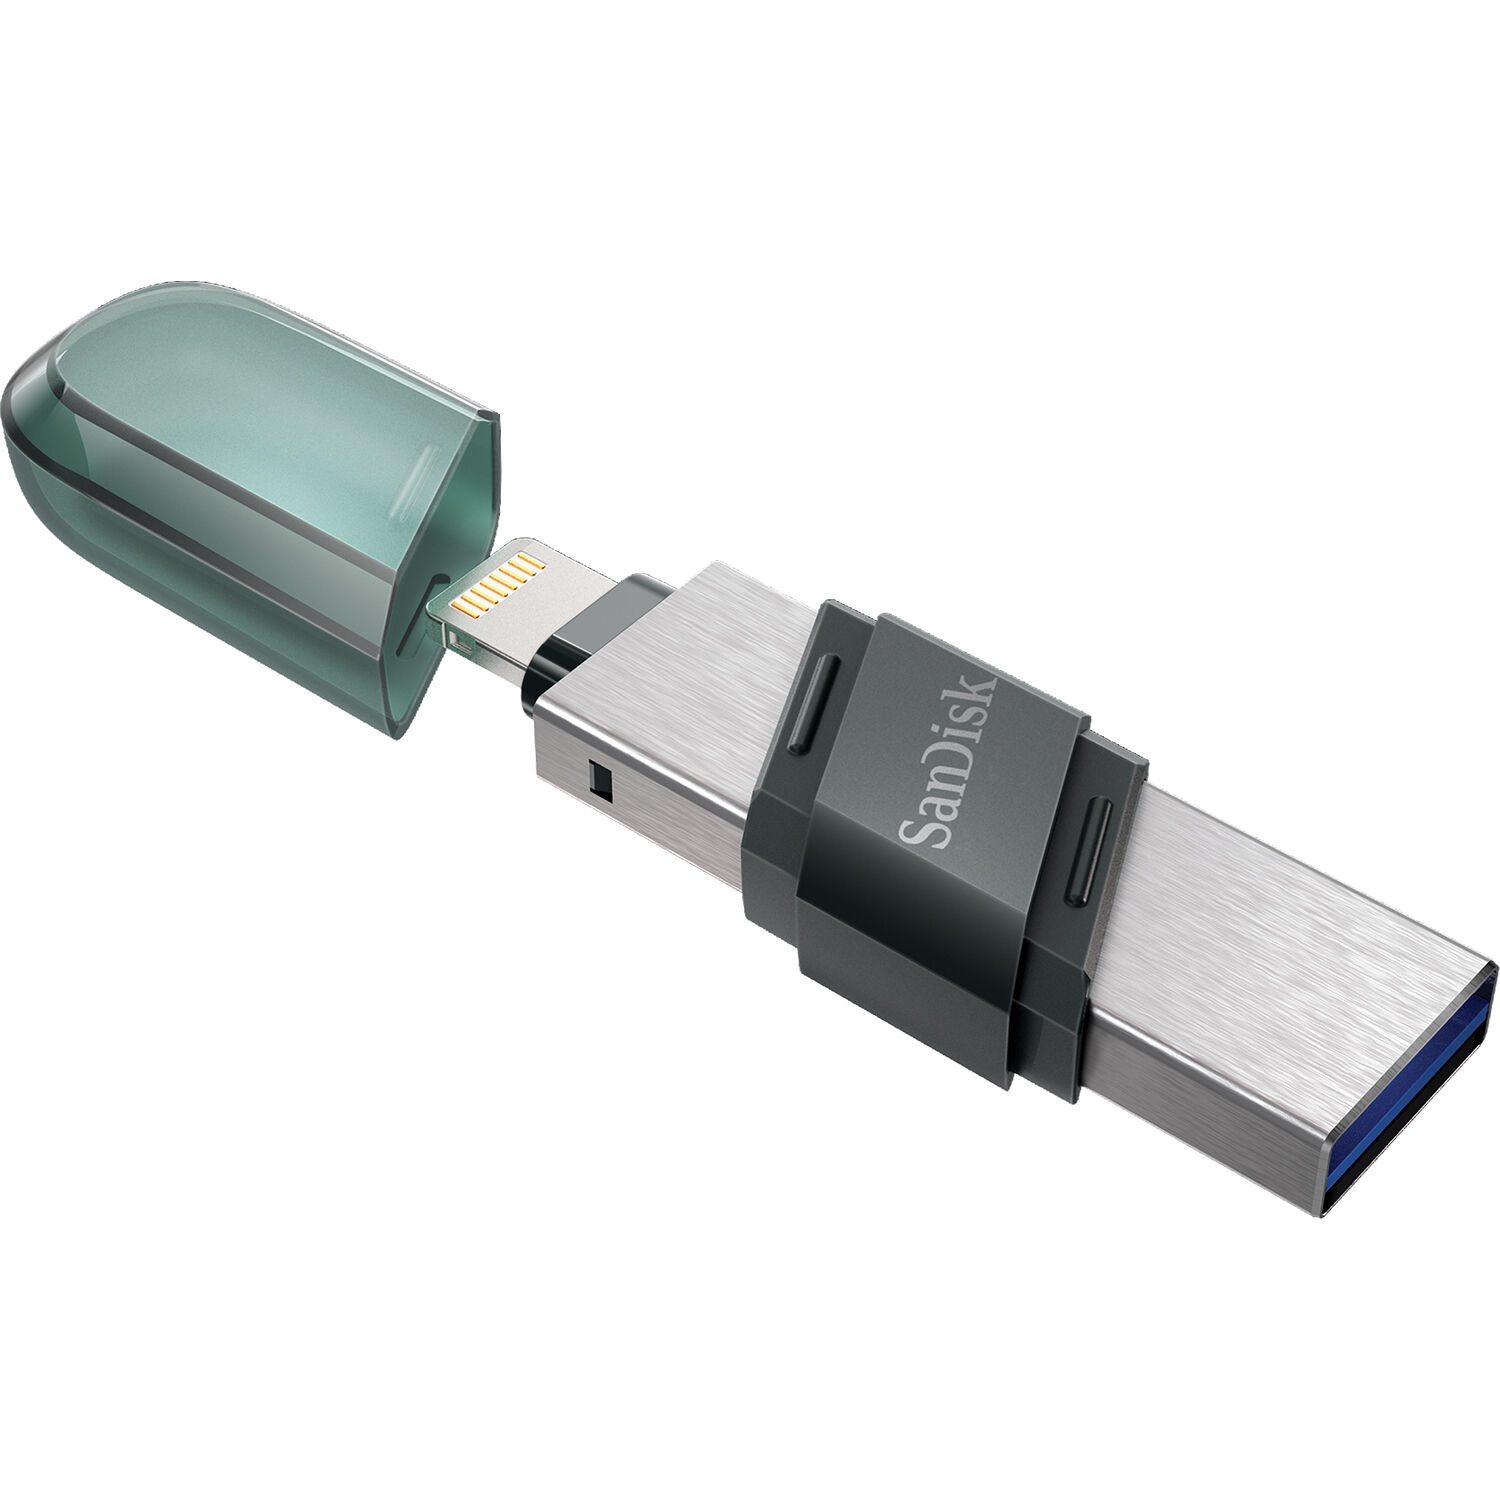 SanDisk 128GB iXpand 2-in-1 Flash Drive Flip